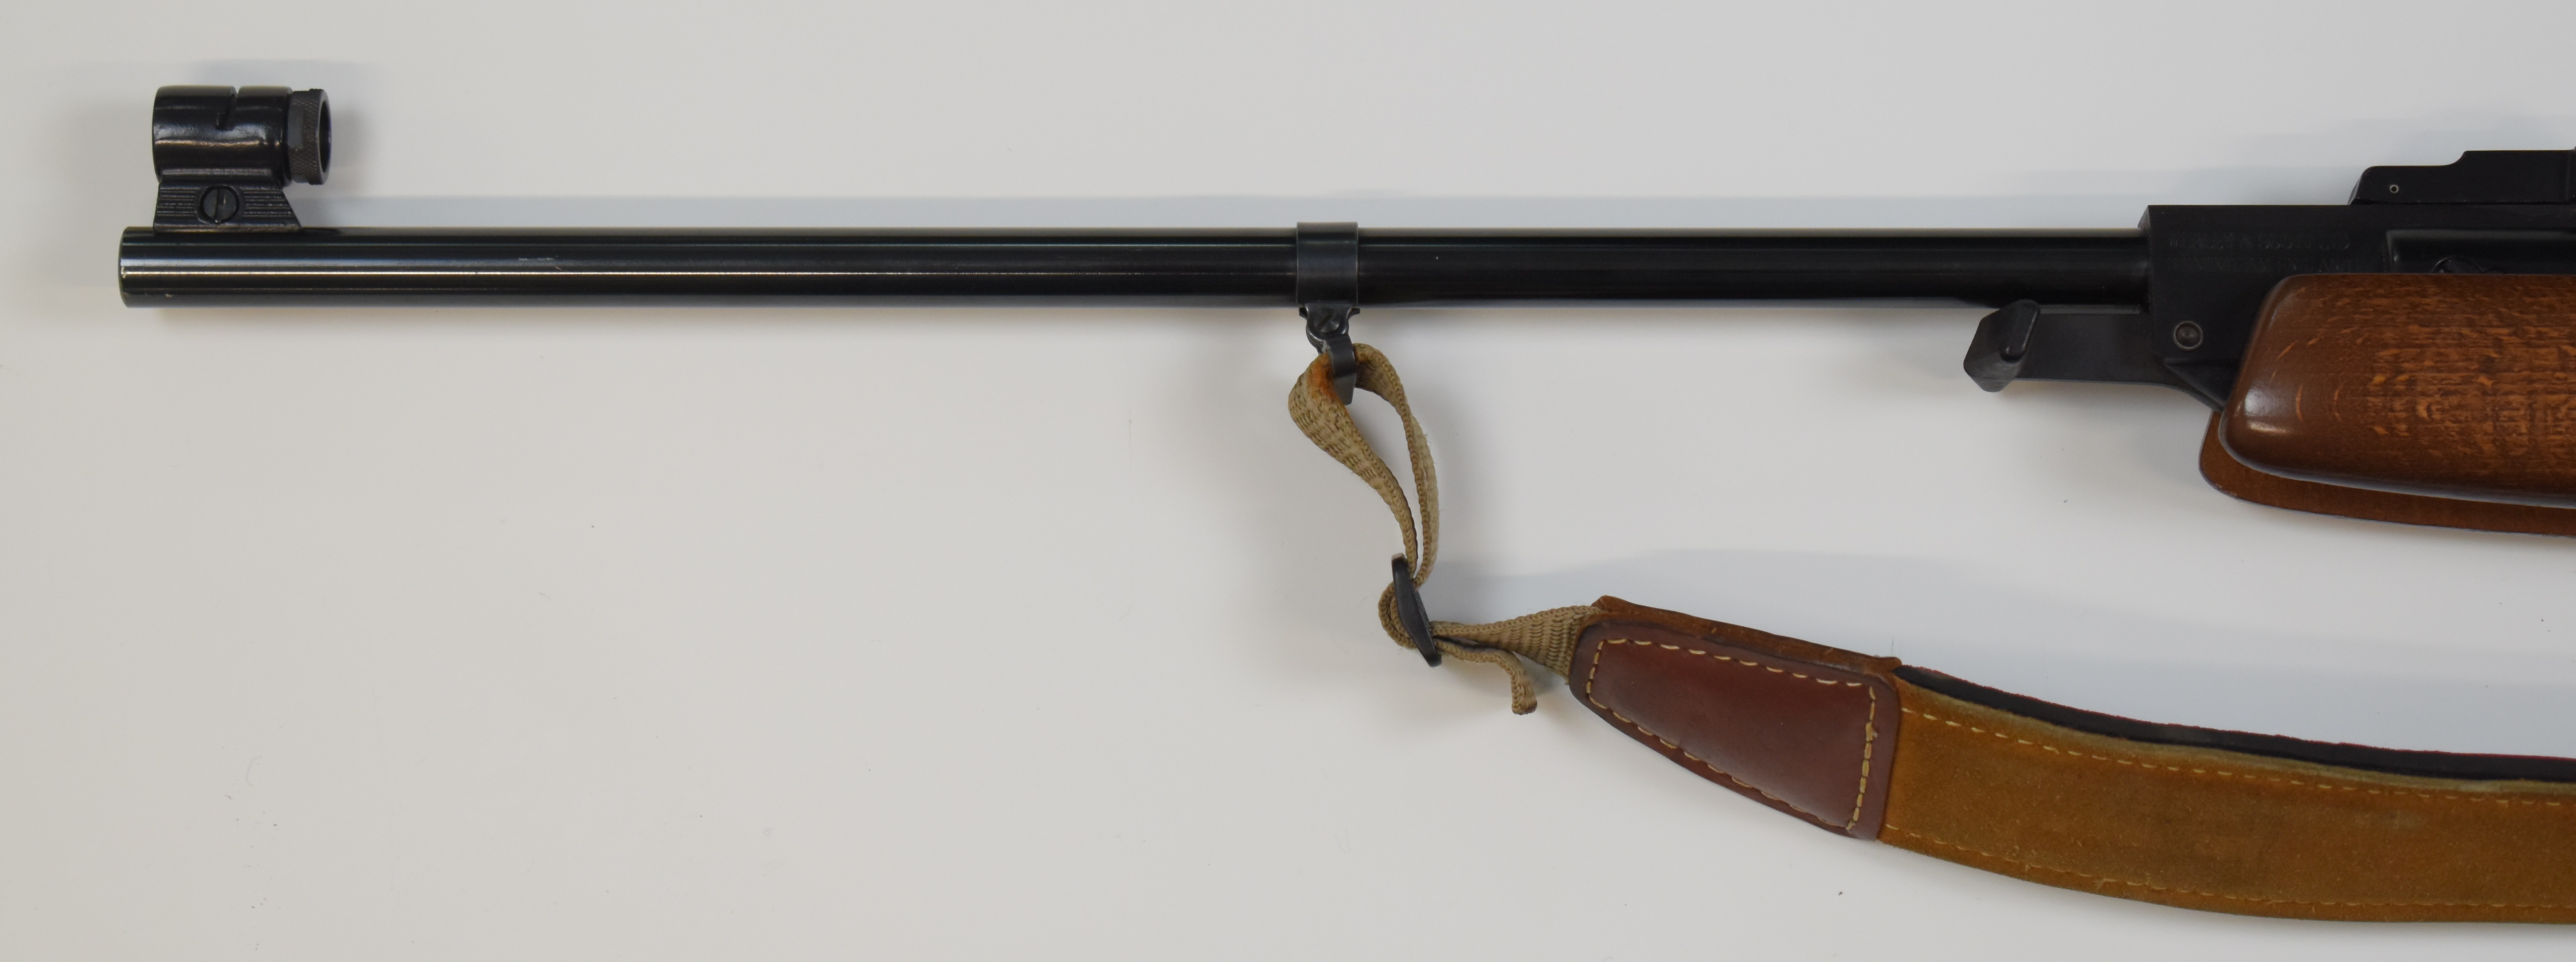 Webley Omega .177 air rifle with chequered semi-pistol grip, raised cheek piece, padded canvas and - Image 10 of 12